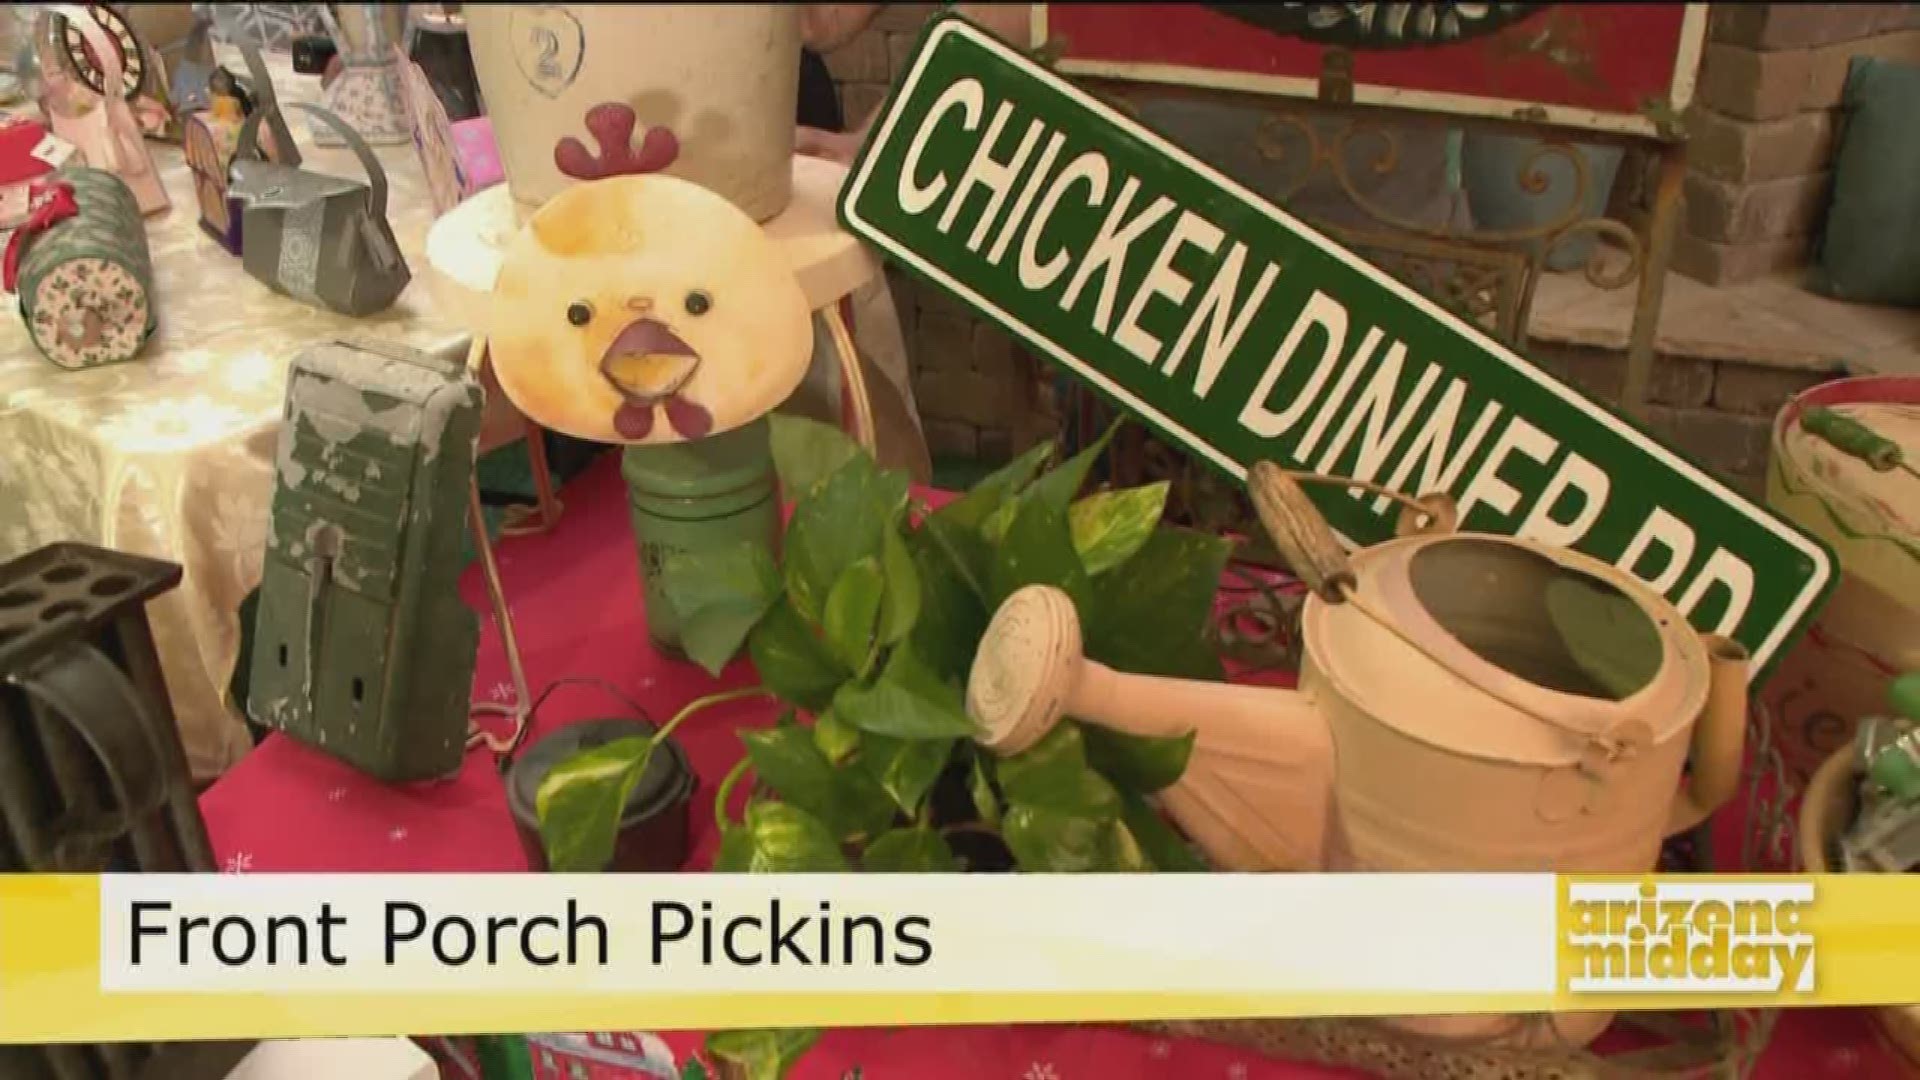 We've got your sneak peek at some of the stuff you'll find at Front Porch Pickins this weekend.